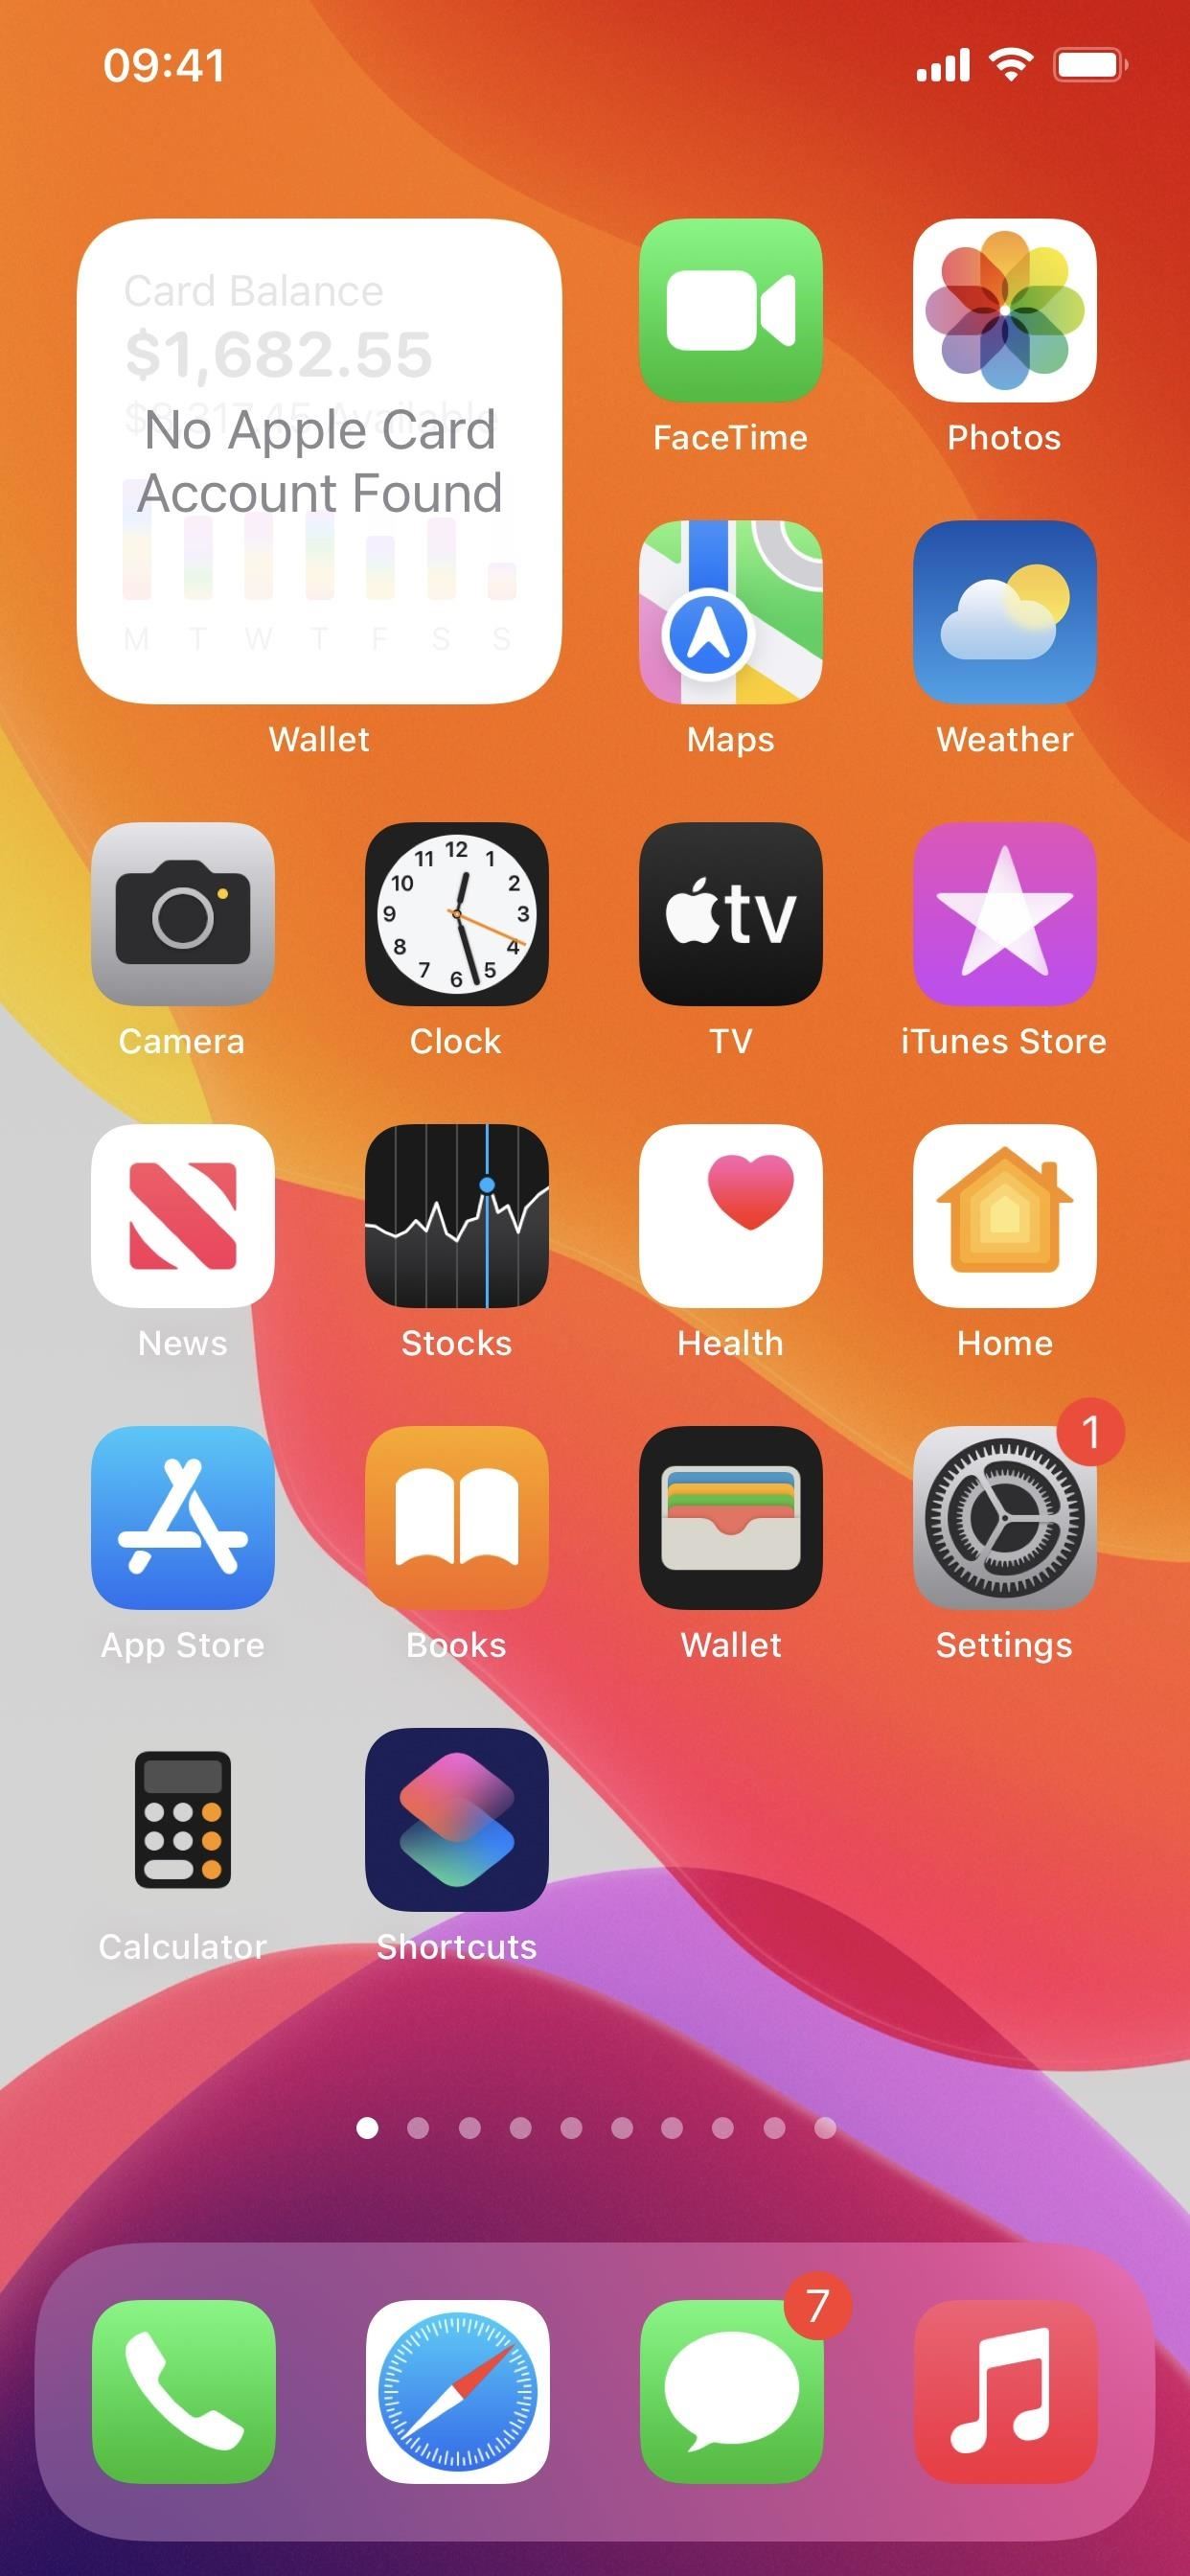 38 Cool New iOS 15.4 Features for iPhone — App Updates, Hidden Changes, and More!